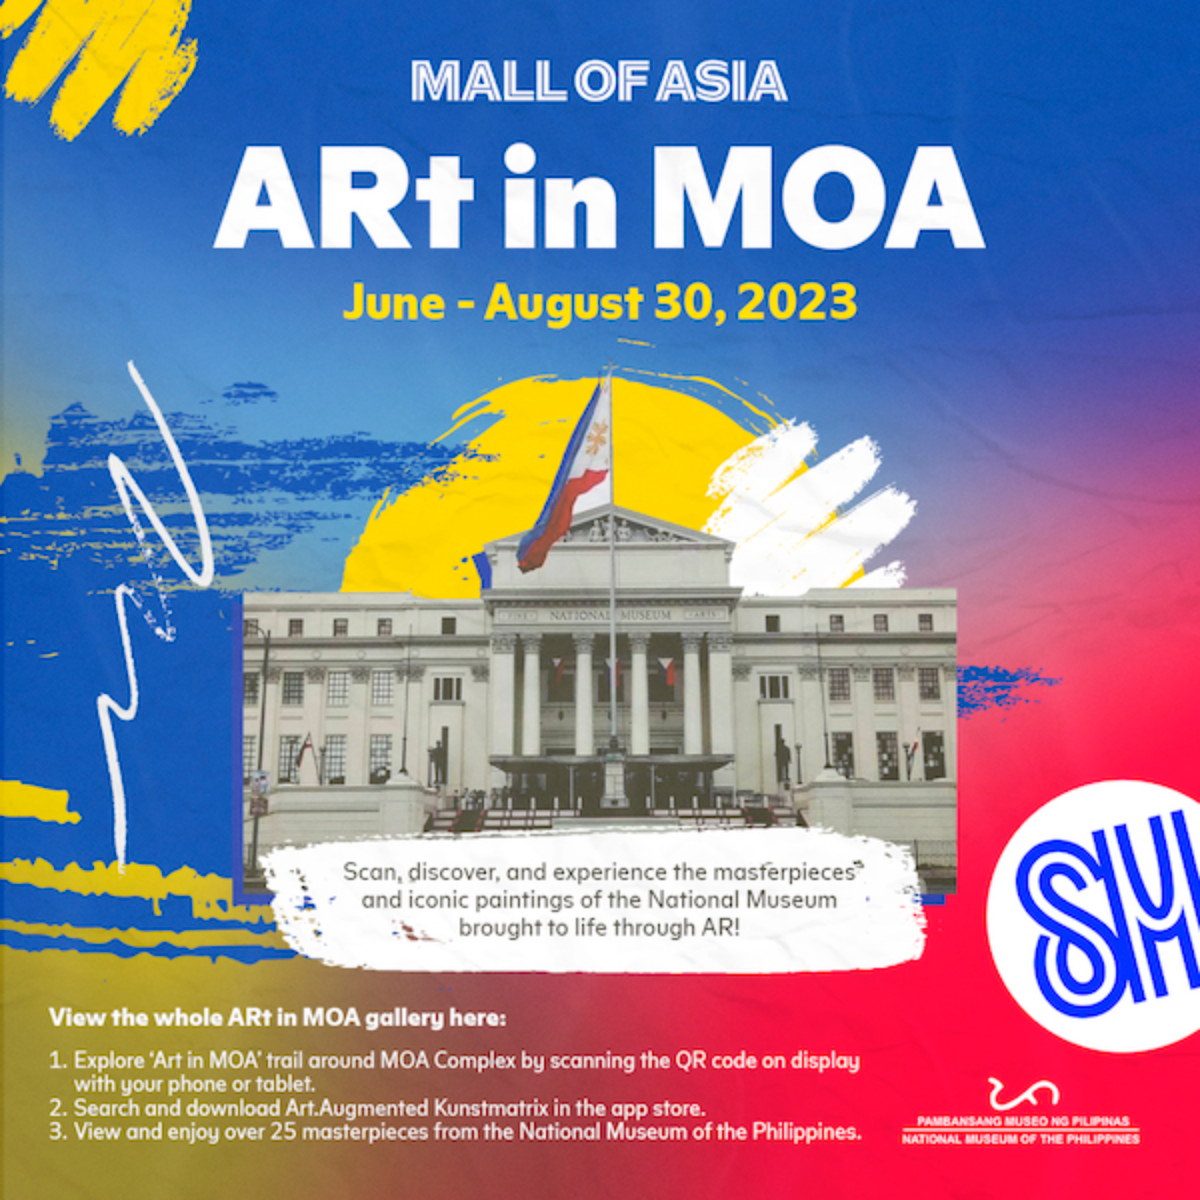 SM Mall of Asia, in collaboration with the National Museum of the Philippines, presents ARt in MOA